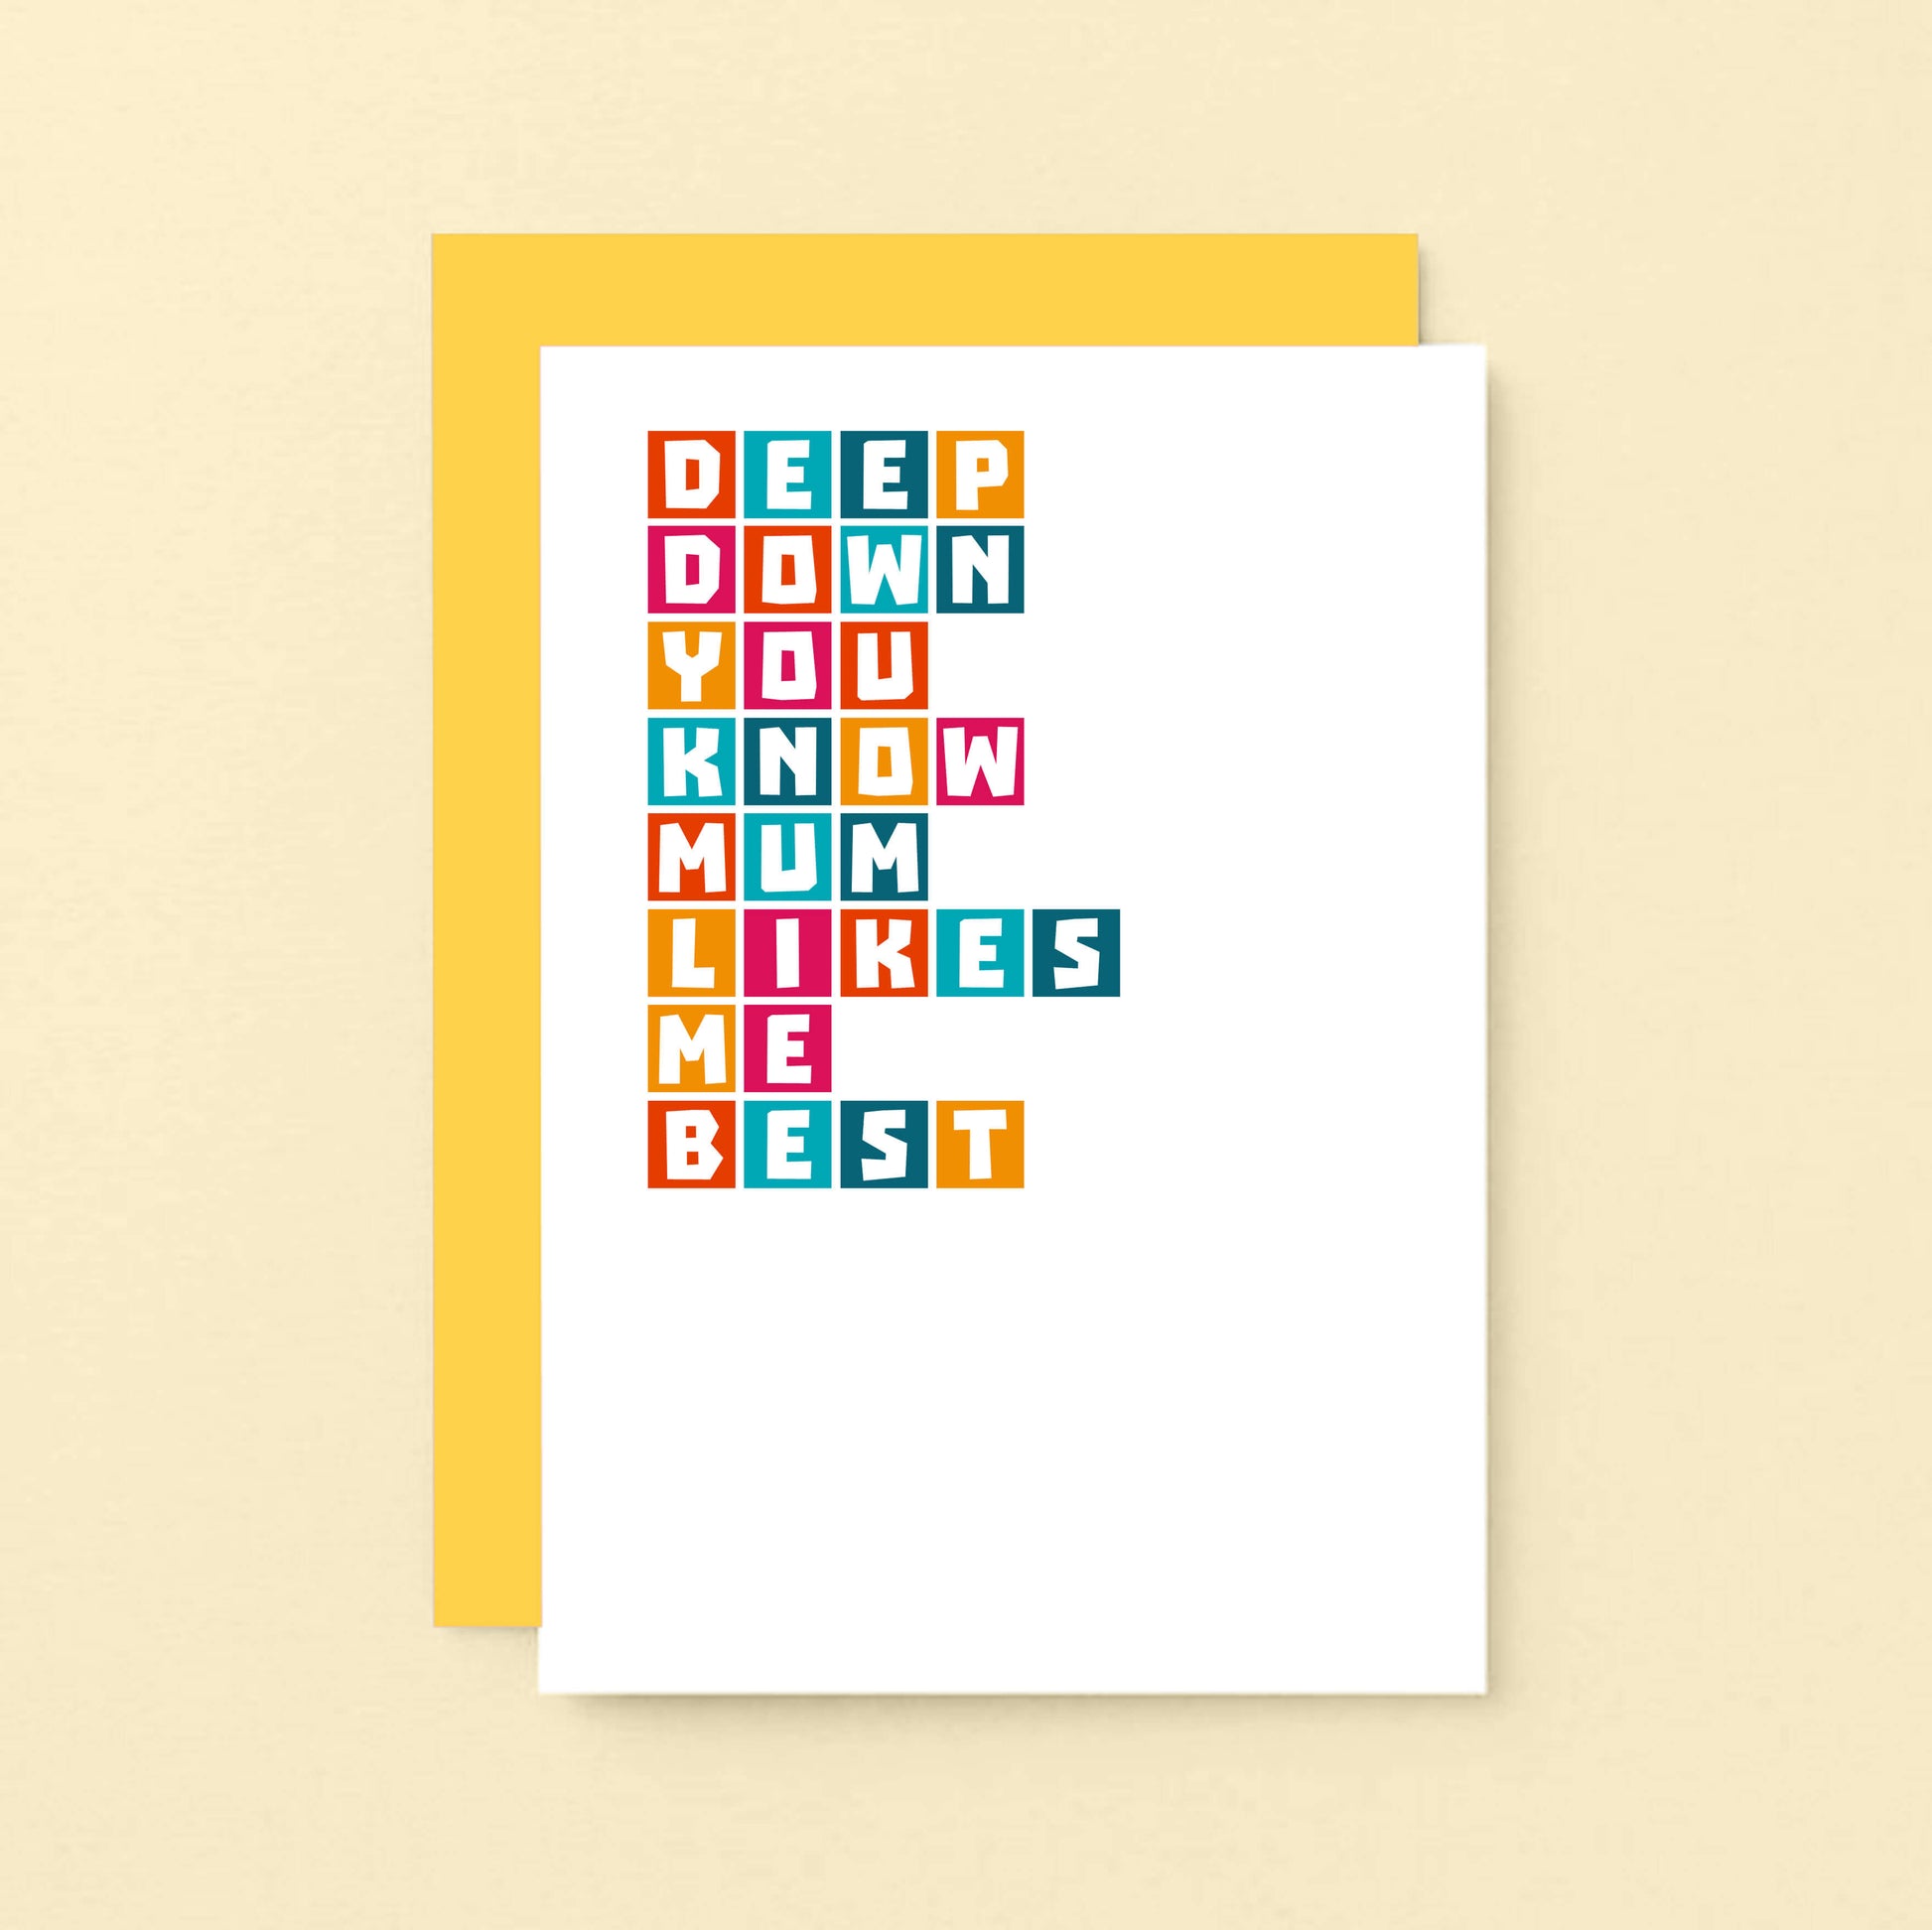 Brother Card by SixElevenCreations. Reads Deep down you know mum likes me best. Product Code SE0336A6